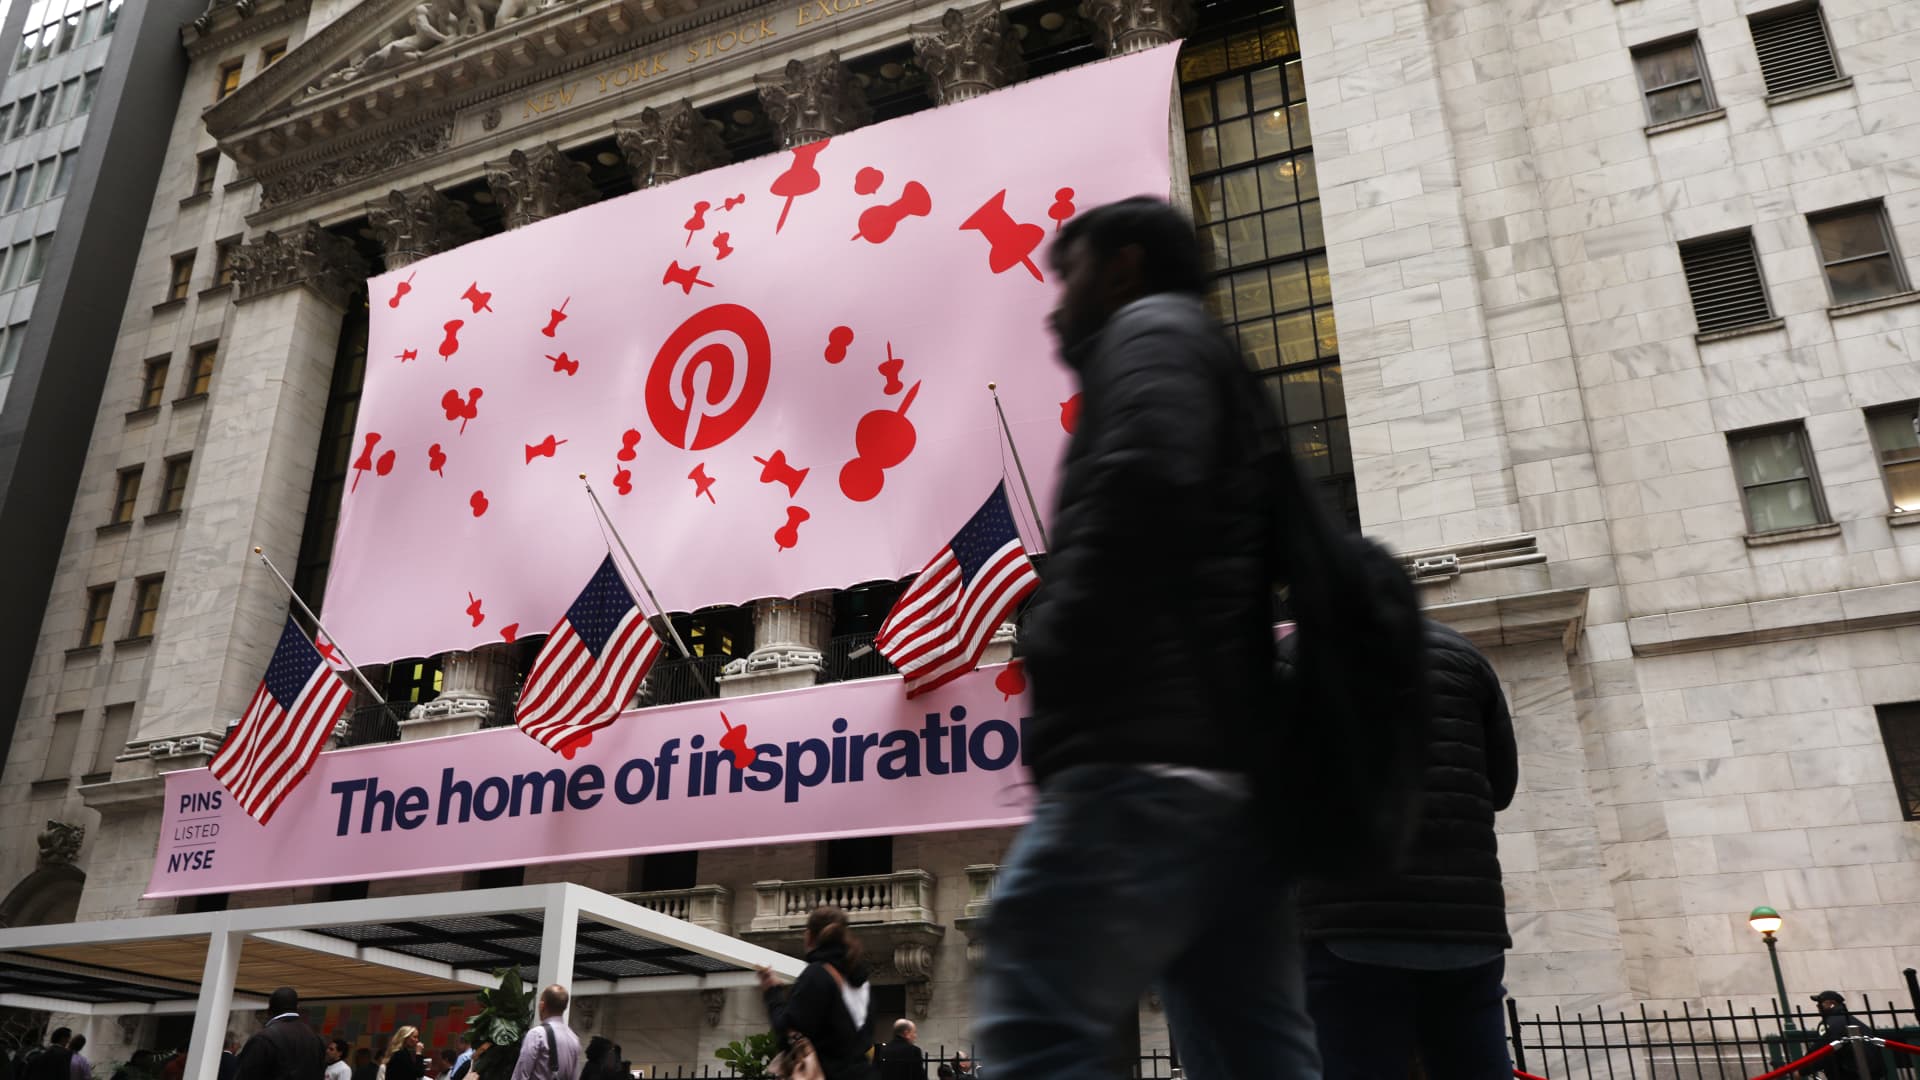 Facebook, Google and Pinterest are 'top picks' to lead 20% growth in online advertising in 2021, Morgan Stanley analysts say